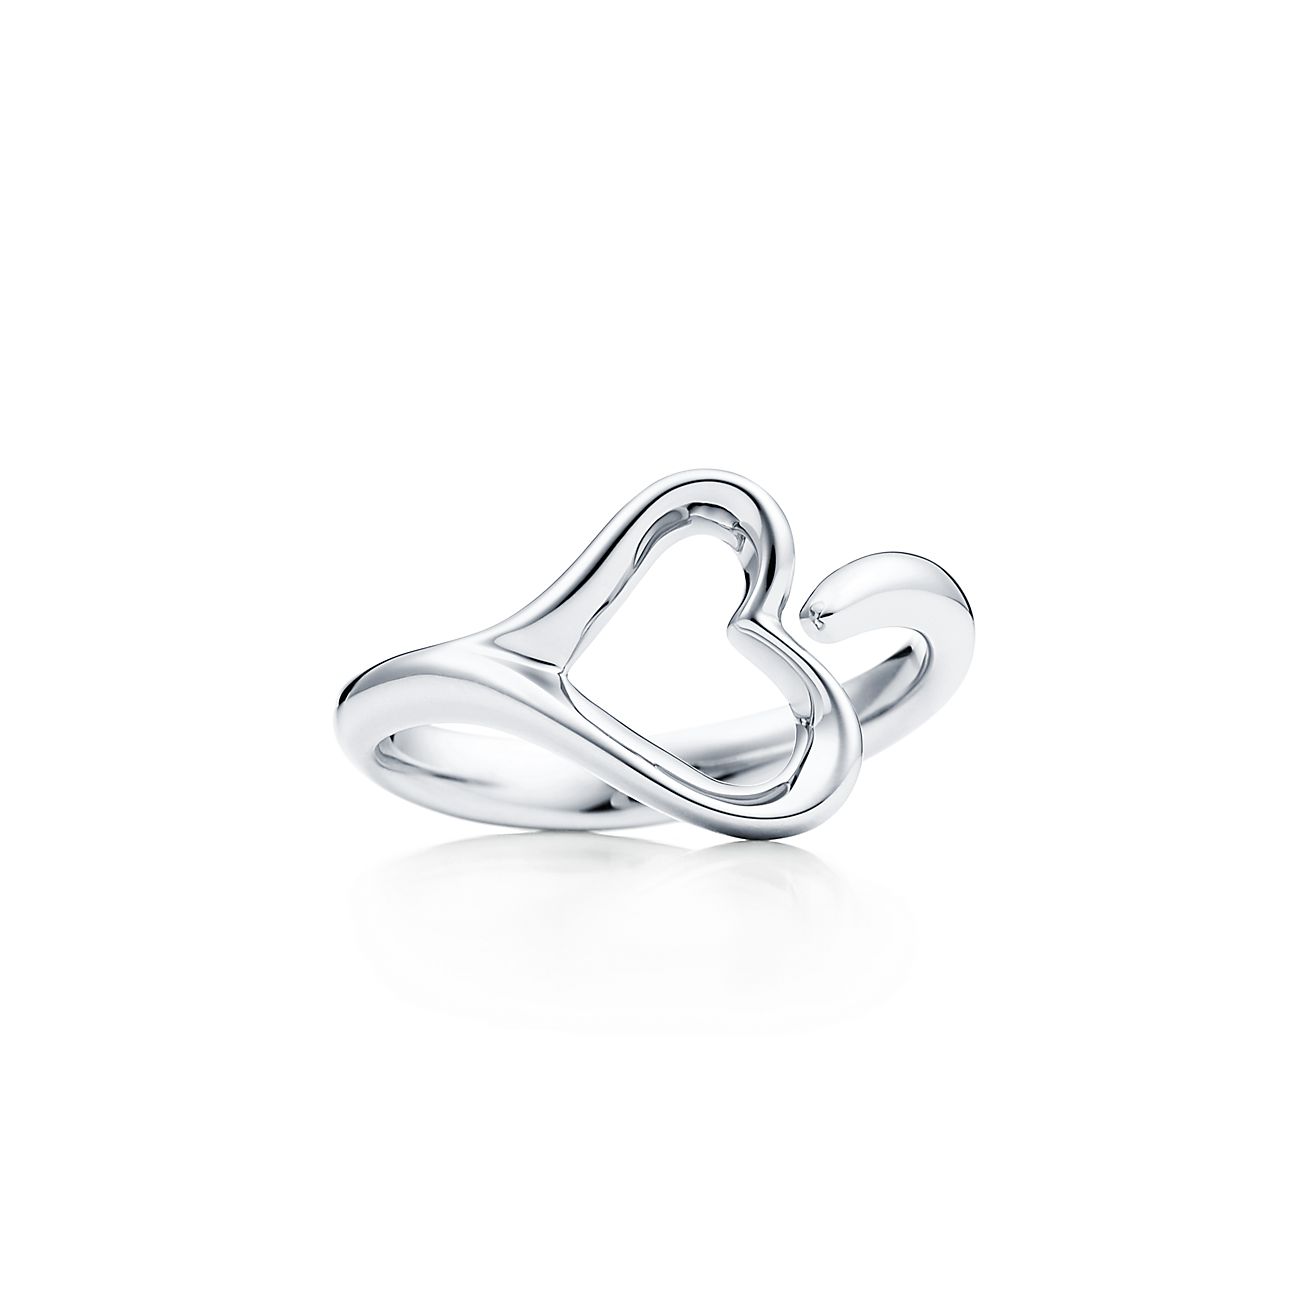 BEAUTIFUL ' HEART RING BOX ' OPENING STERLING SILVER CHARM